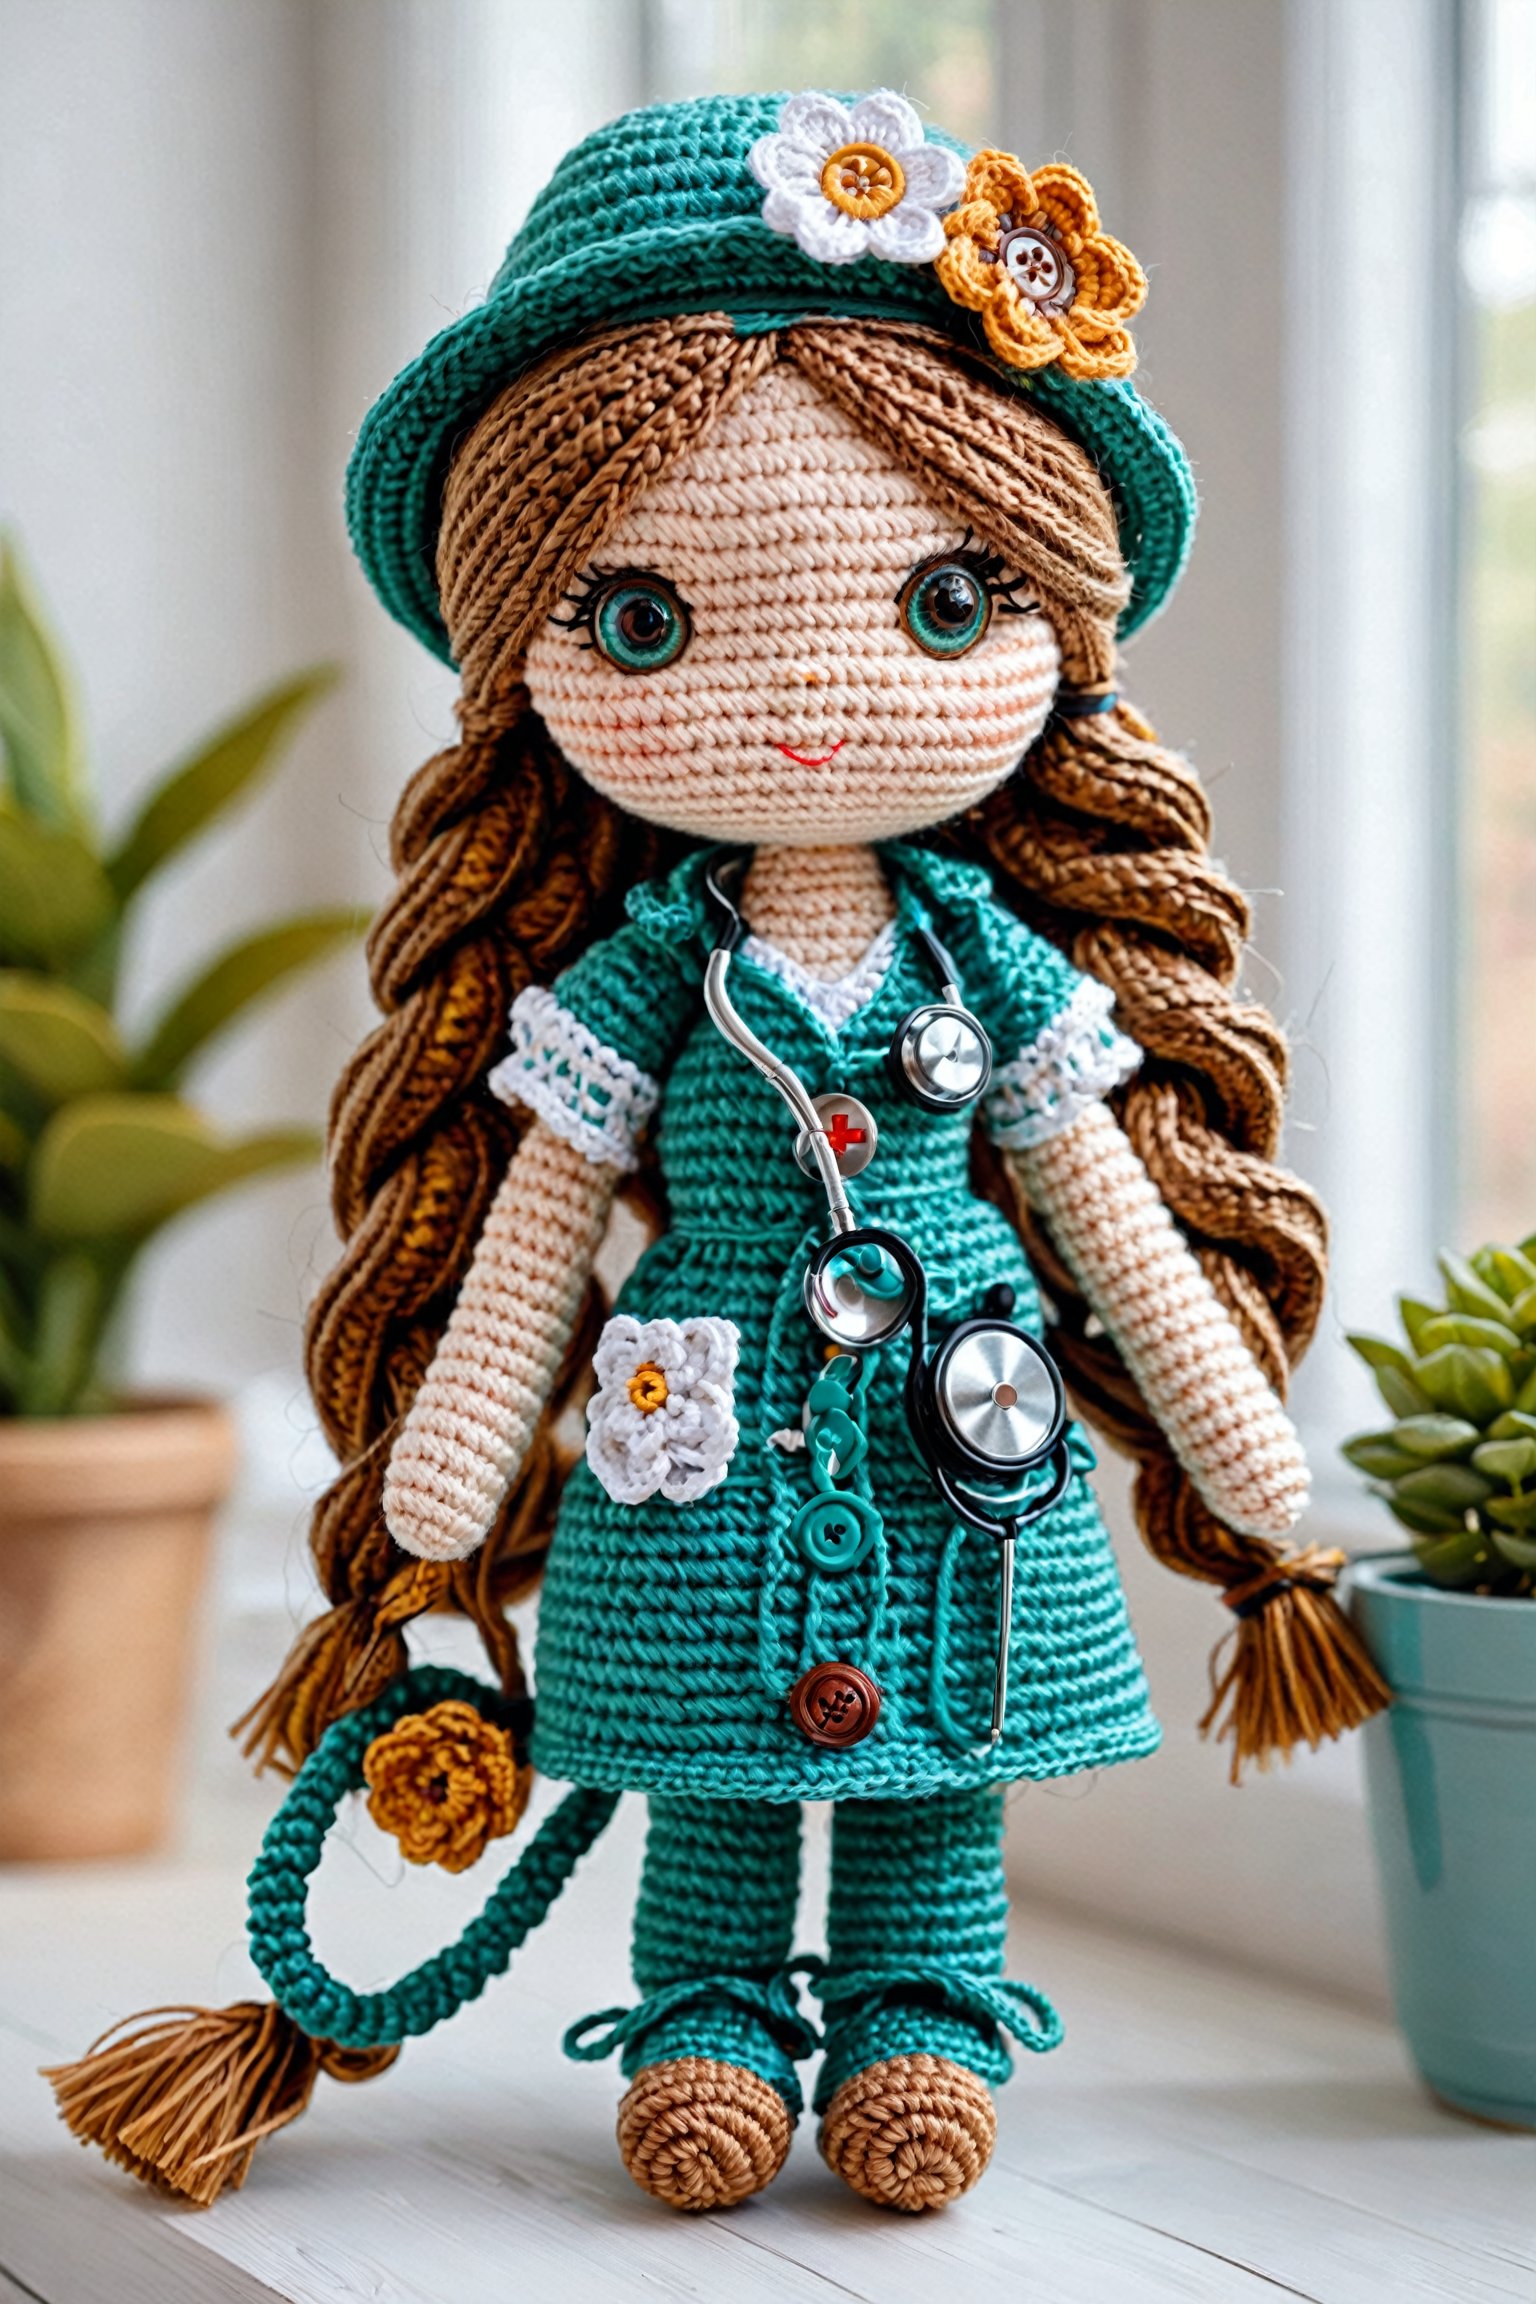 A meticulously crafted crochet doll. The doll has large, expressive eyes, a hat adorned with a flower, and long braided hair. She is dressed in a teal-colored outfit with buttons and a stethoscope around her neck, suggesting she might be a nurse or medical professional. The doll stands on a white surface, and in the background, there's a blurred view of a window and some indoor plants.